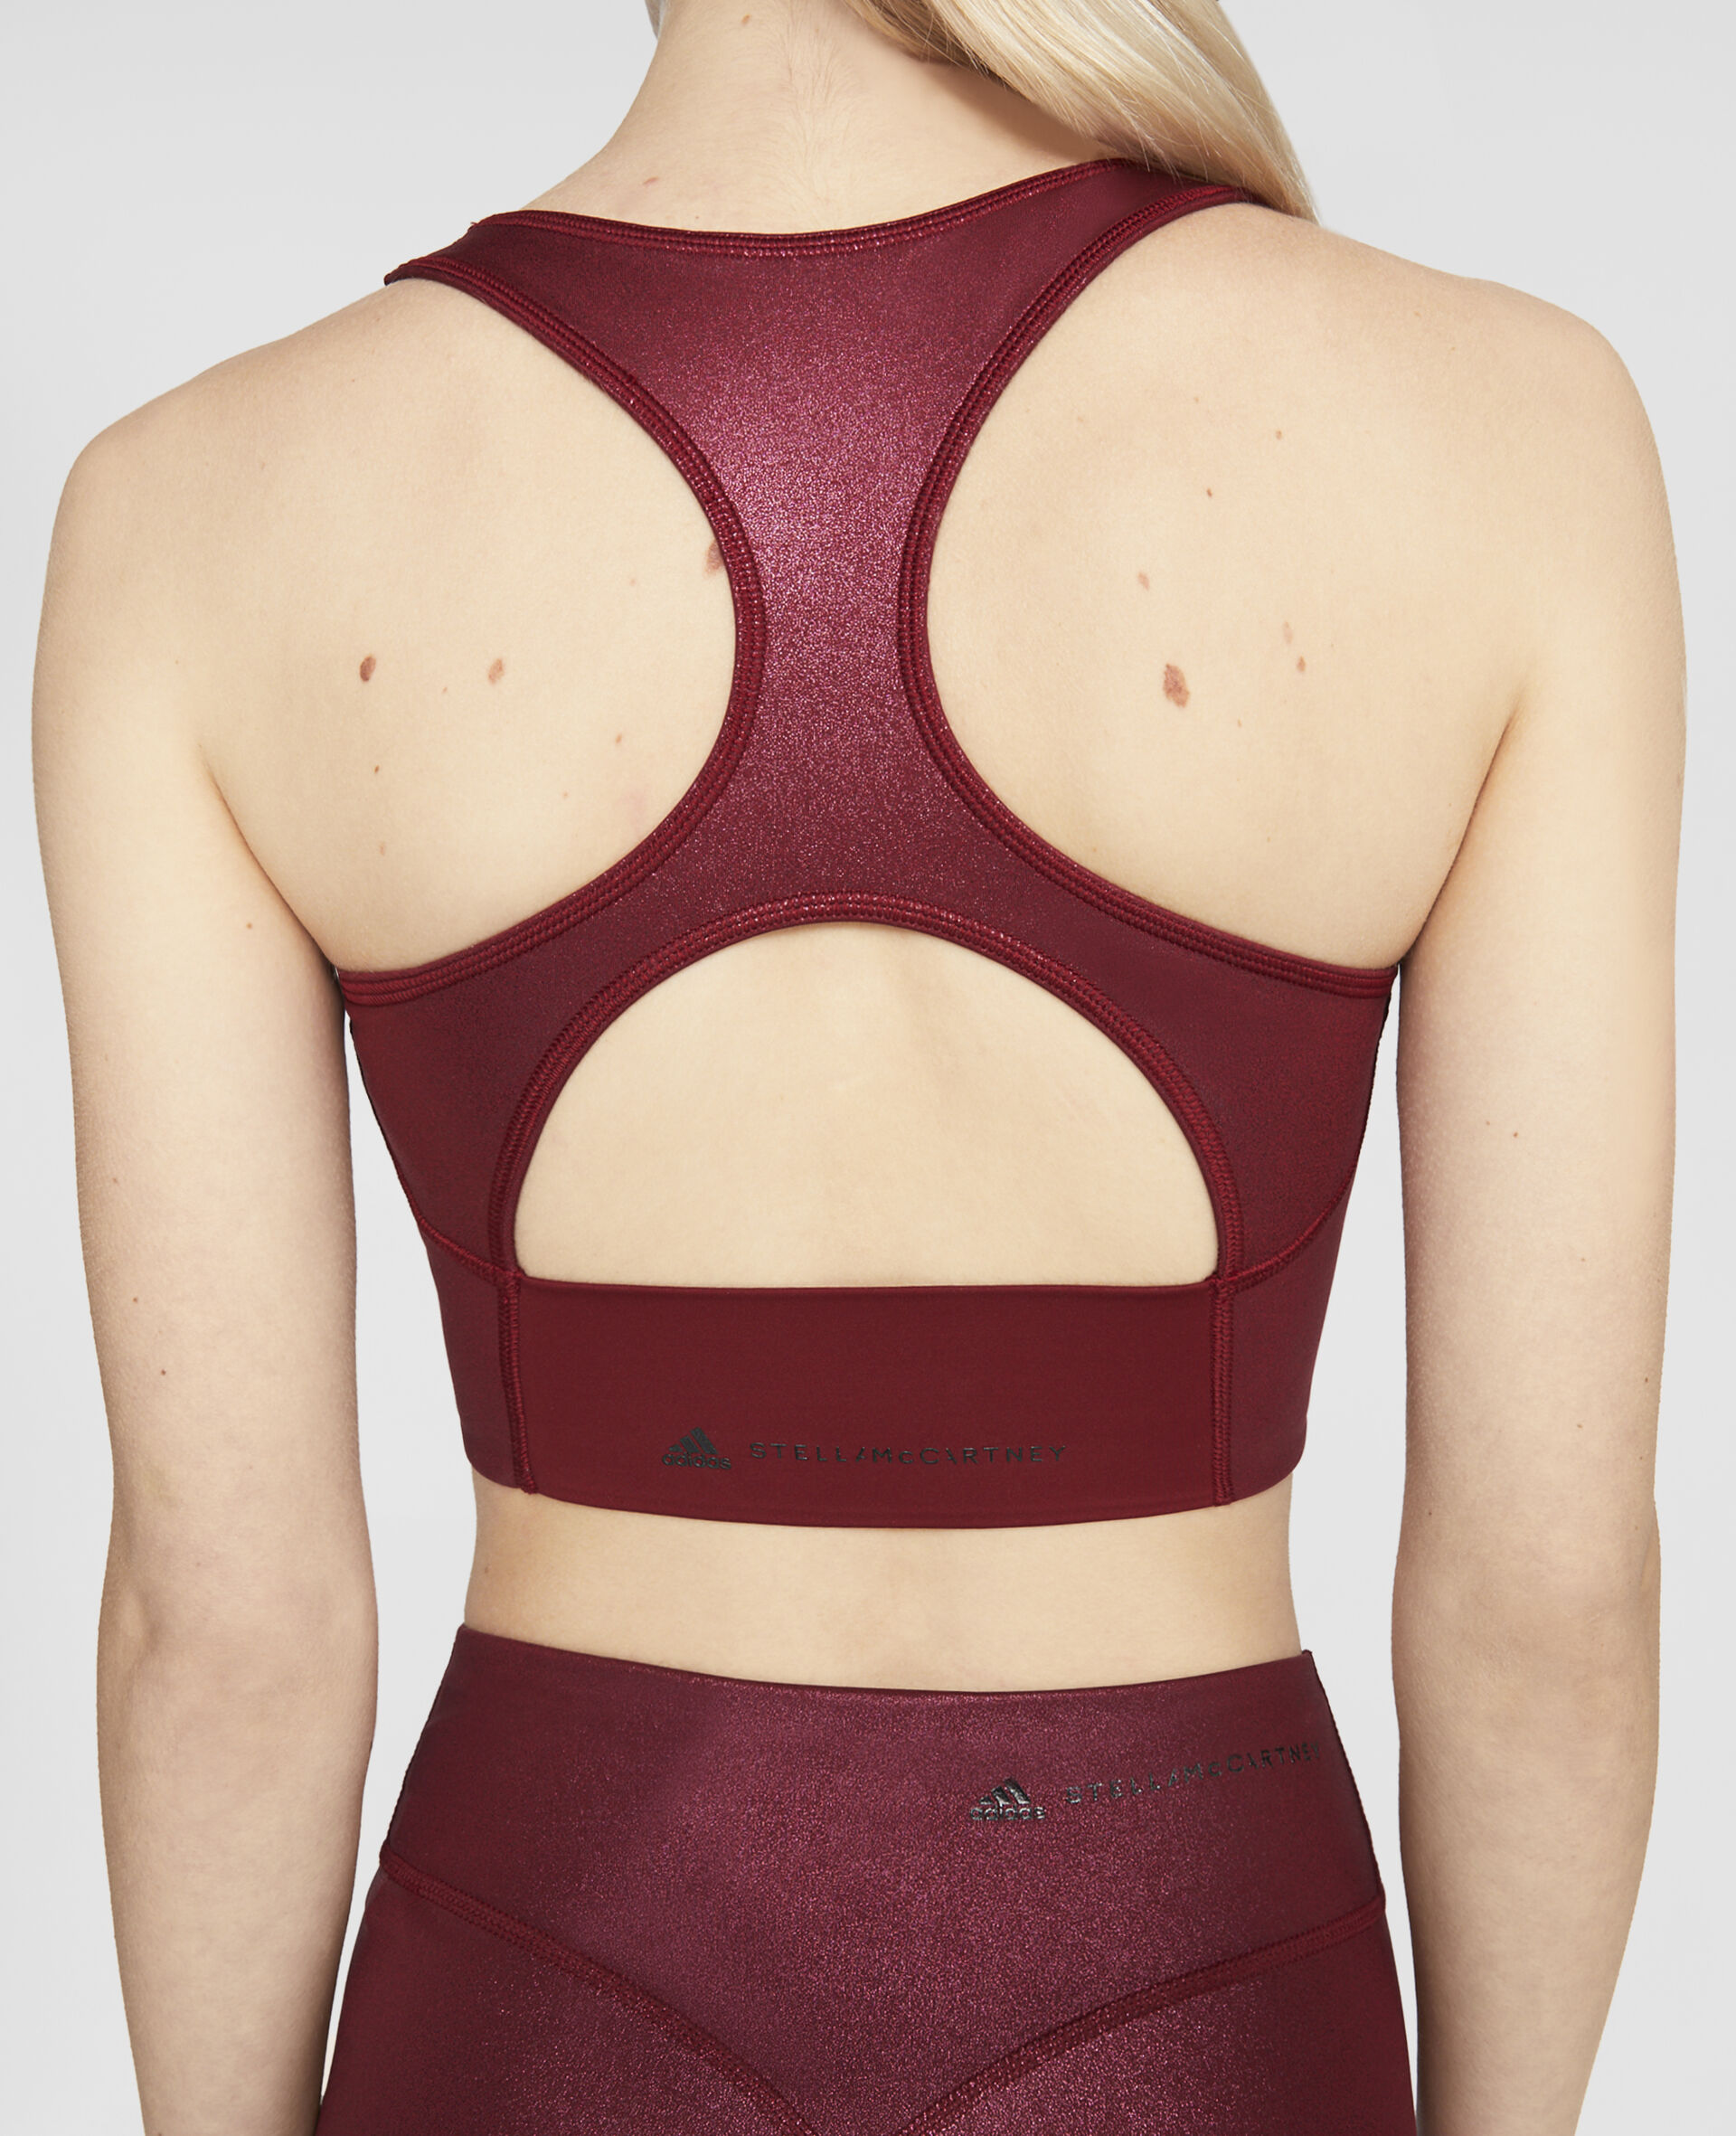 Shiny Training Crop Top-Red-large image number 3